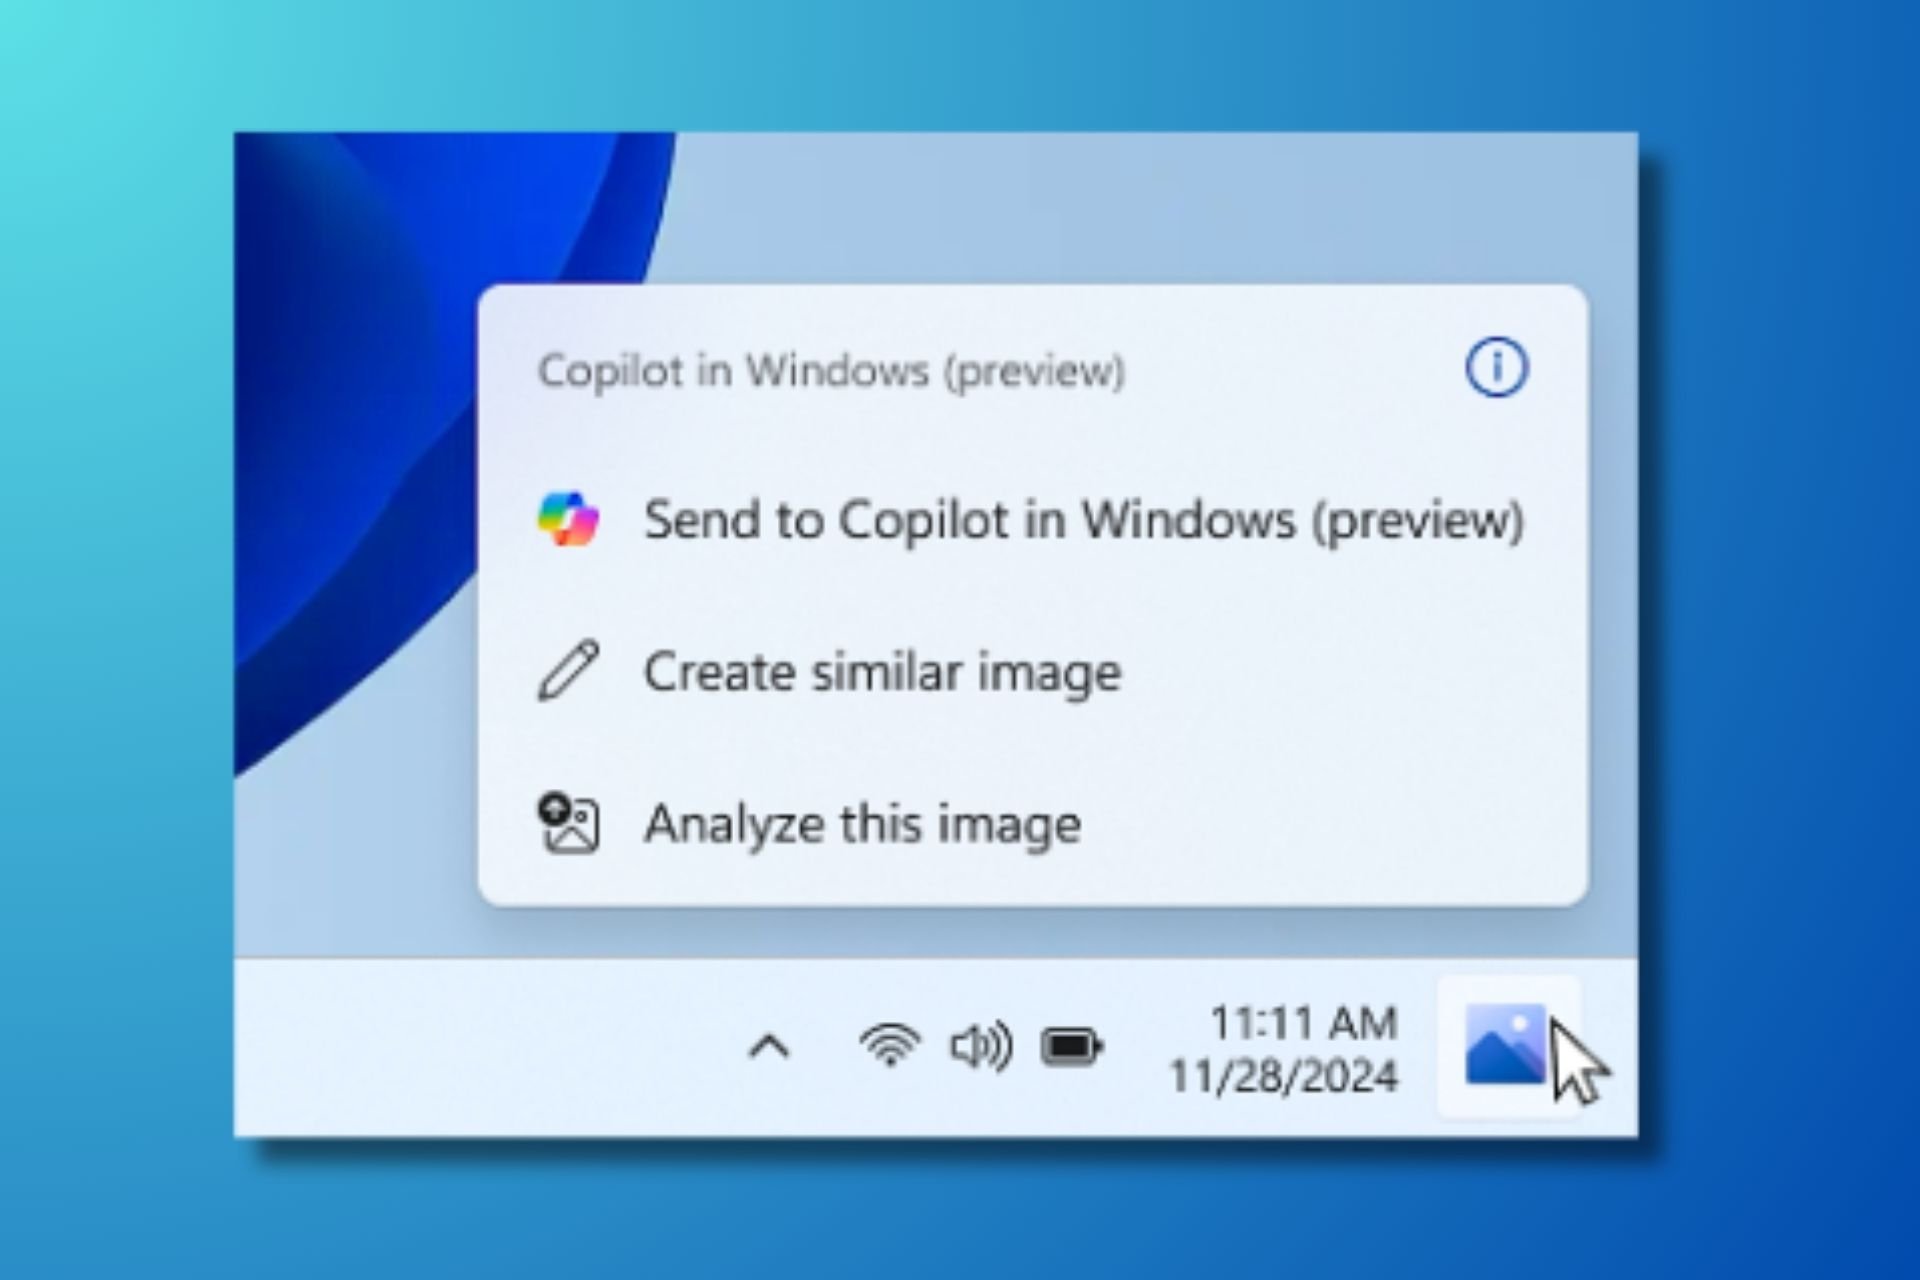 Beta Channel Build 22635.3430 adds Copilot's ability to change its icon